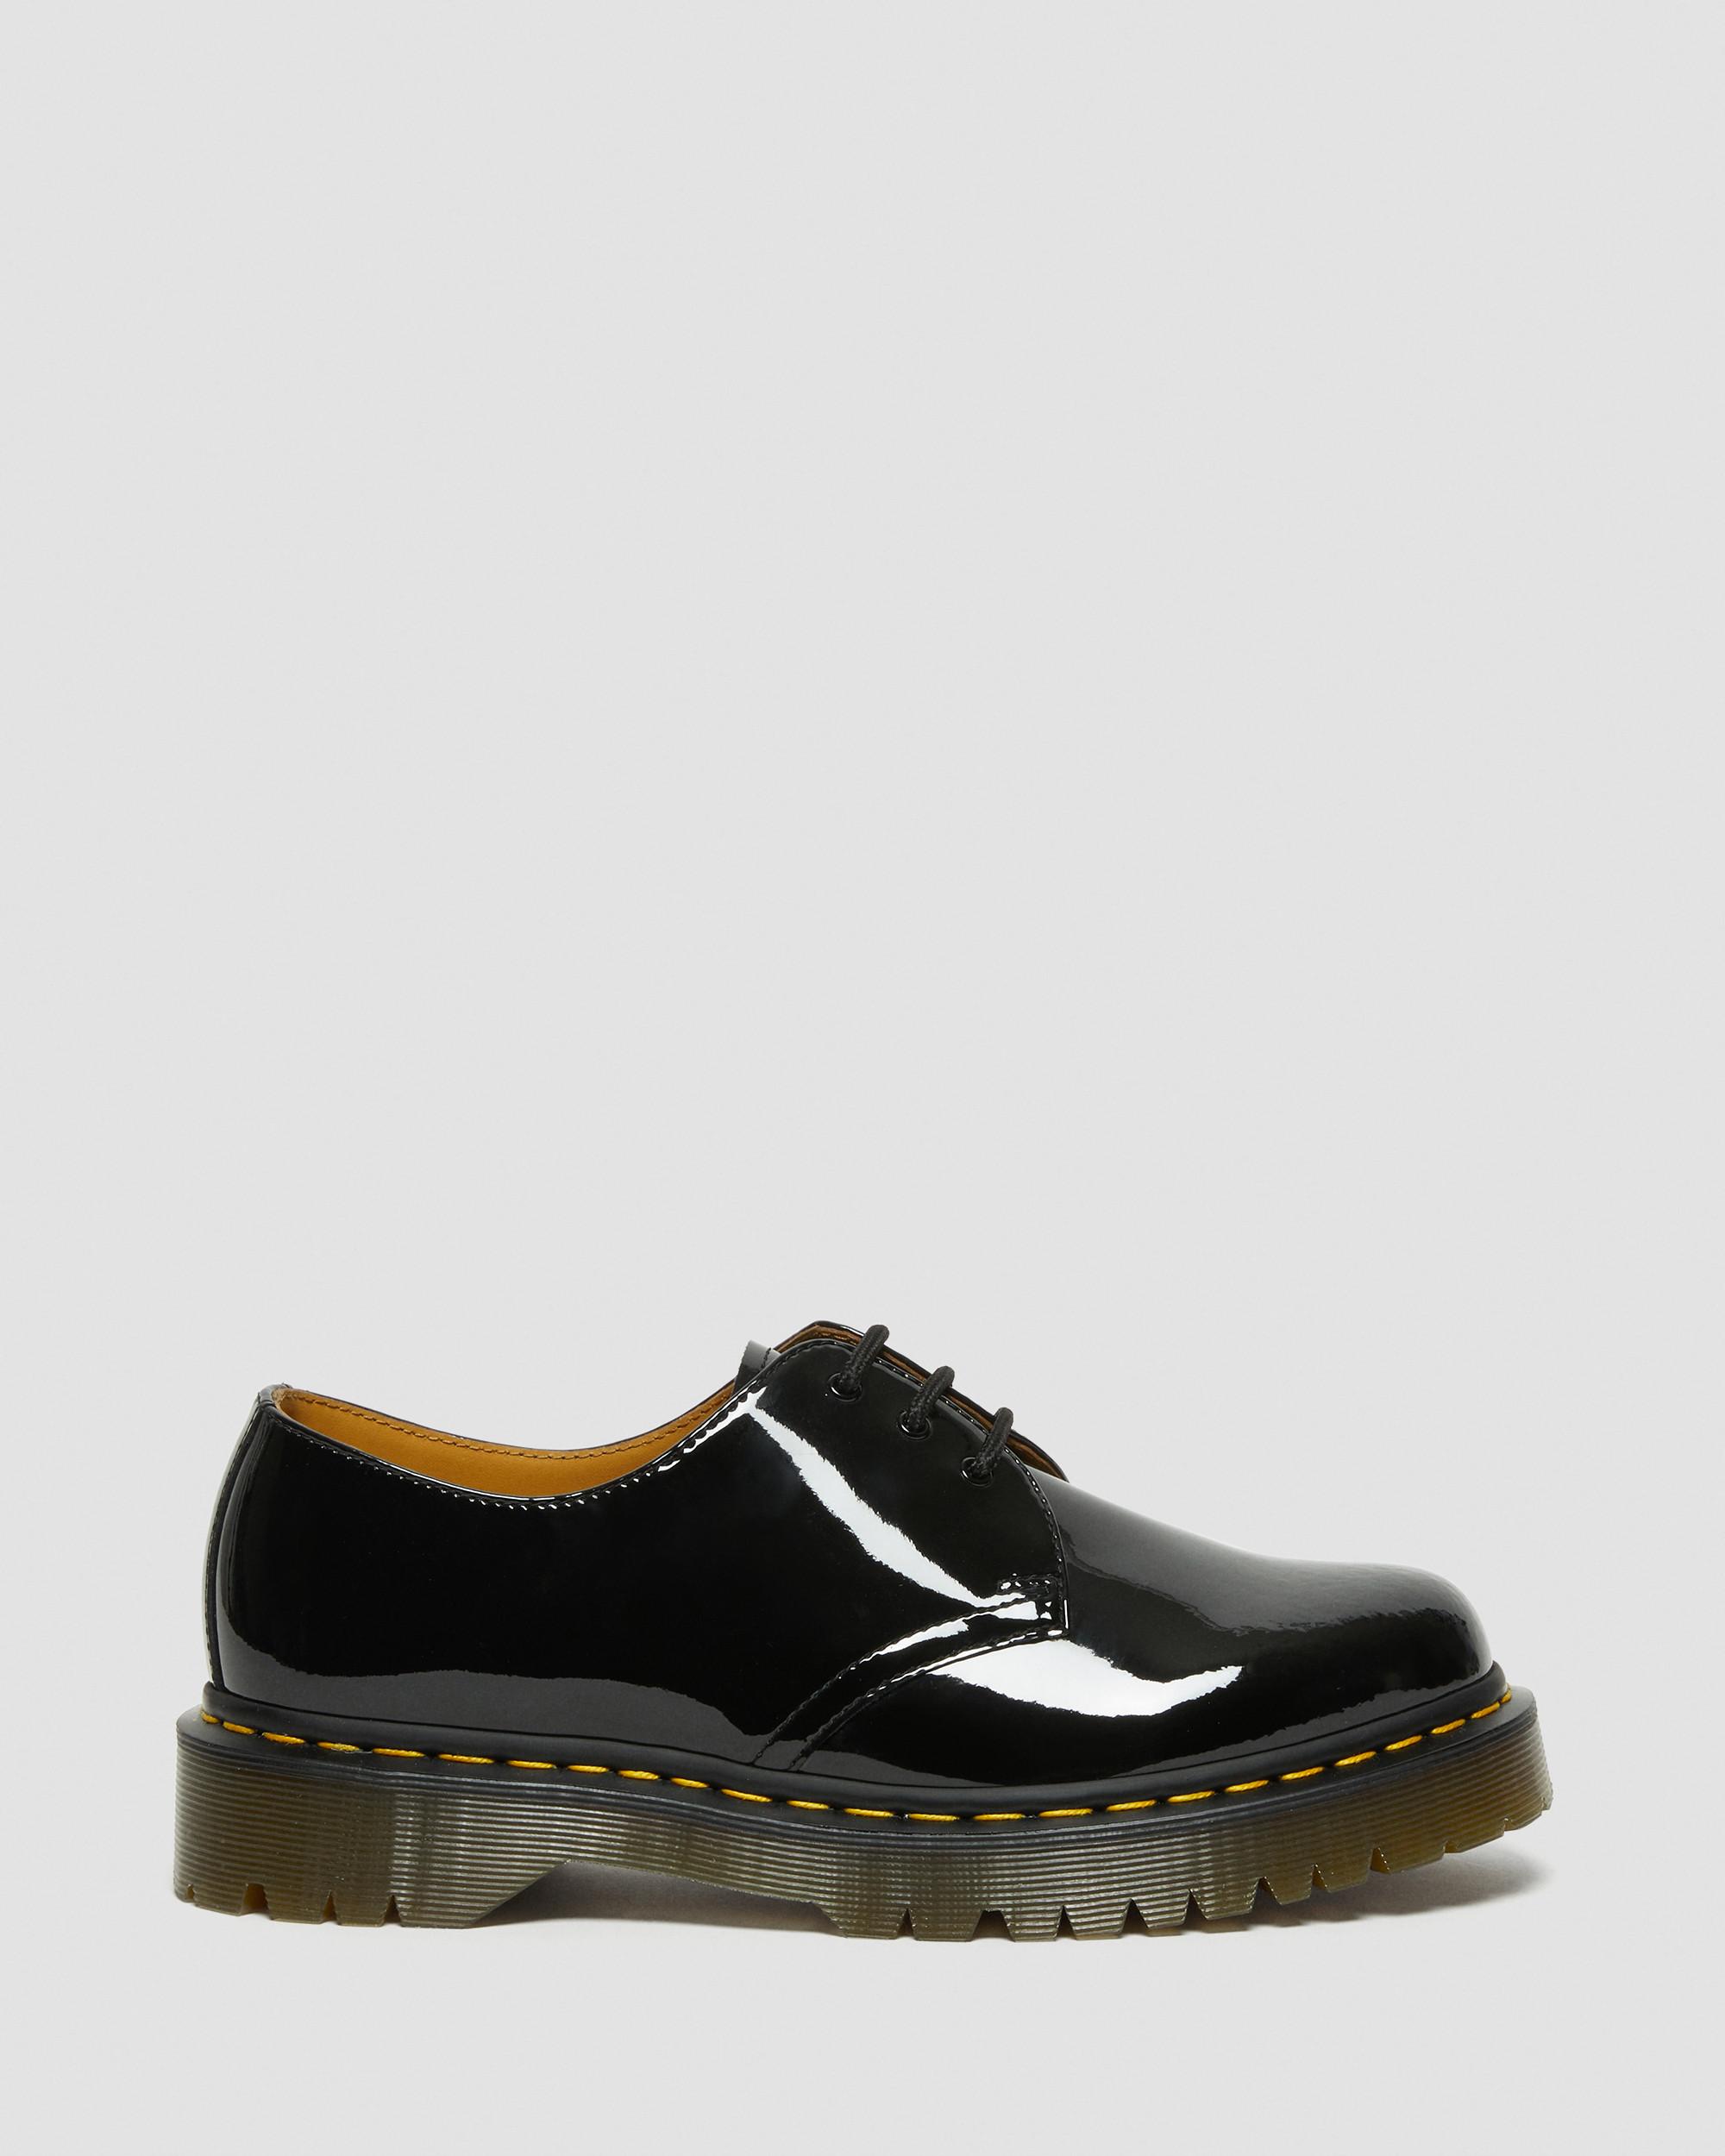 1461 Bex Leather Oxford Shoes Martens